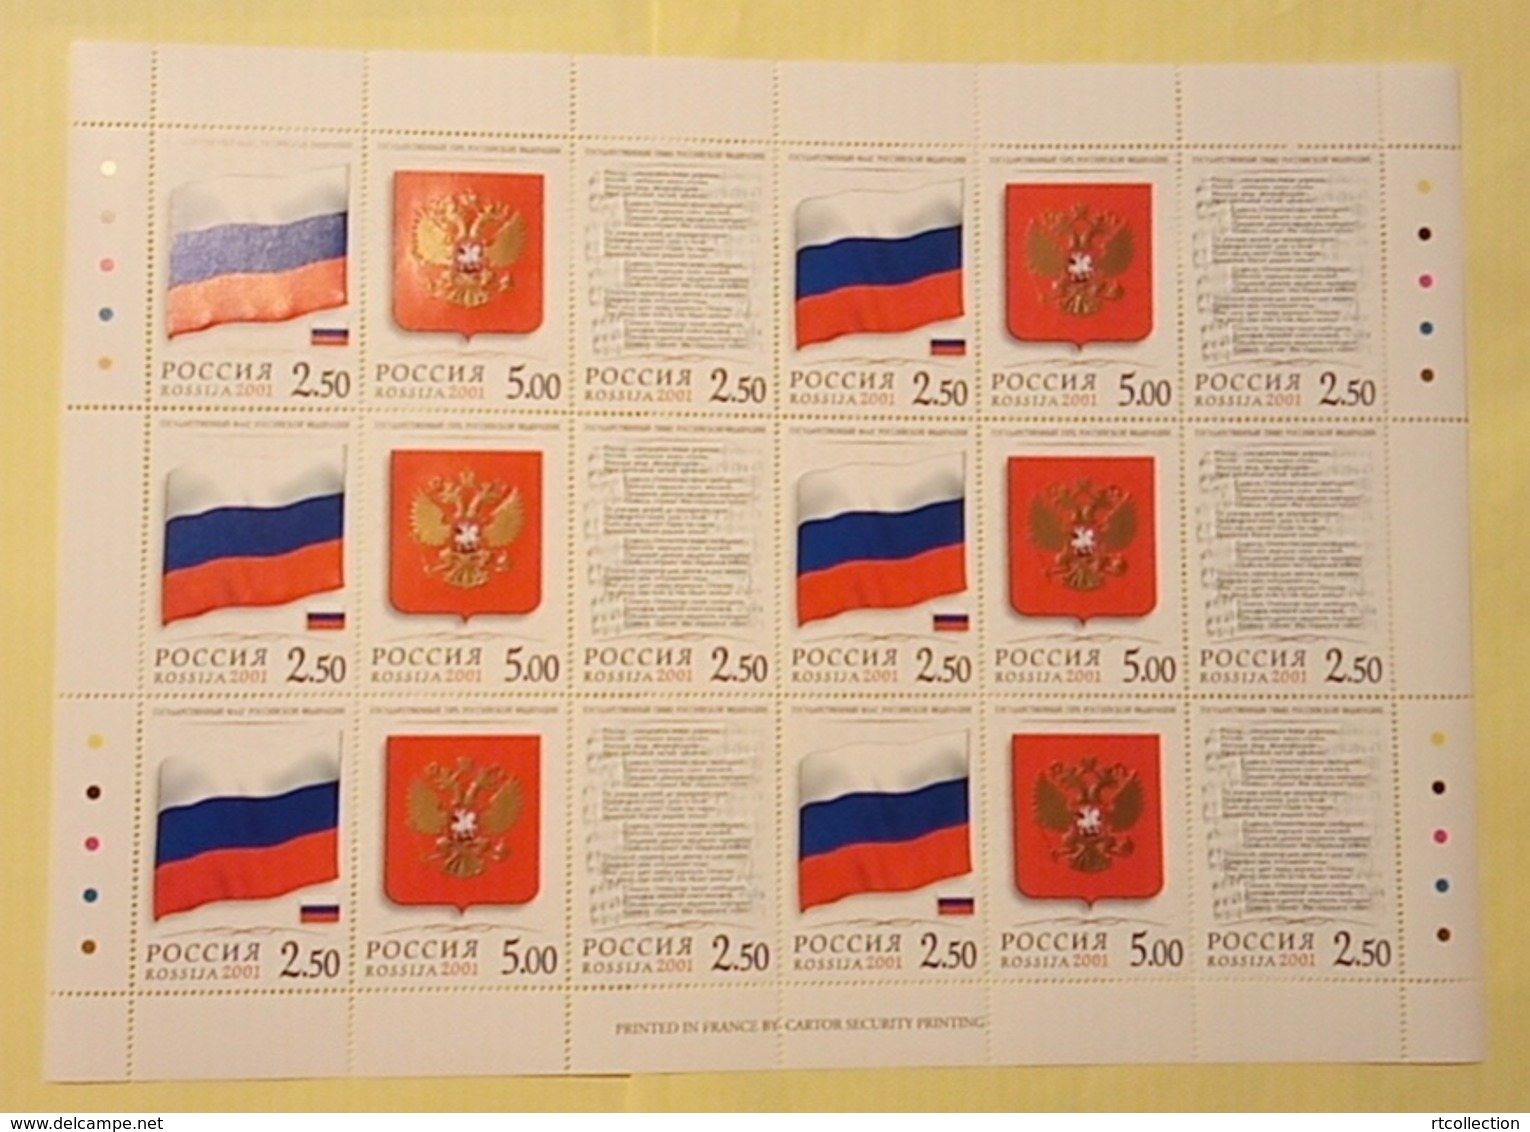 Russia 2001 Sheet State Emblems Of The Russian Federation Flags Anthem Arms Flag Emblem Symbols Michel 913A-915A - Hojas Completas